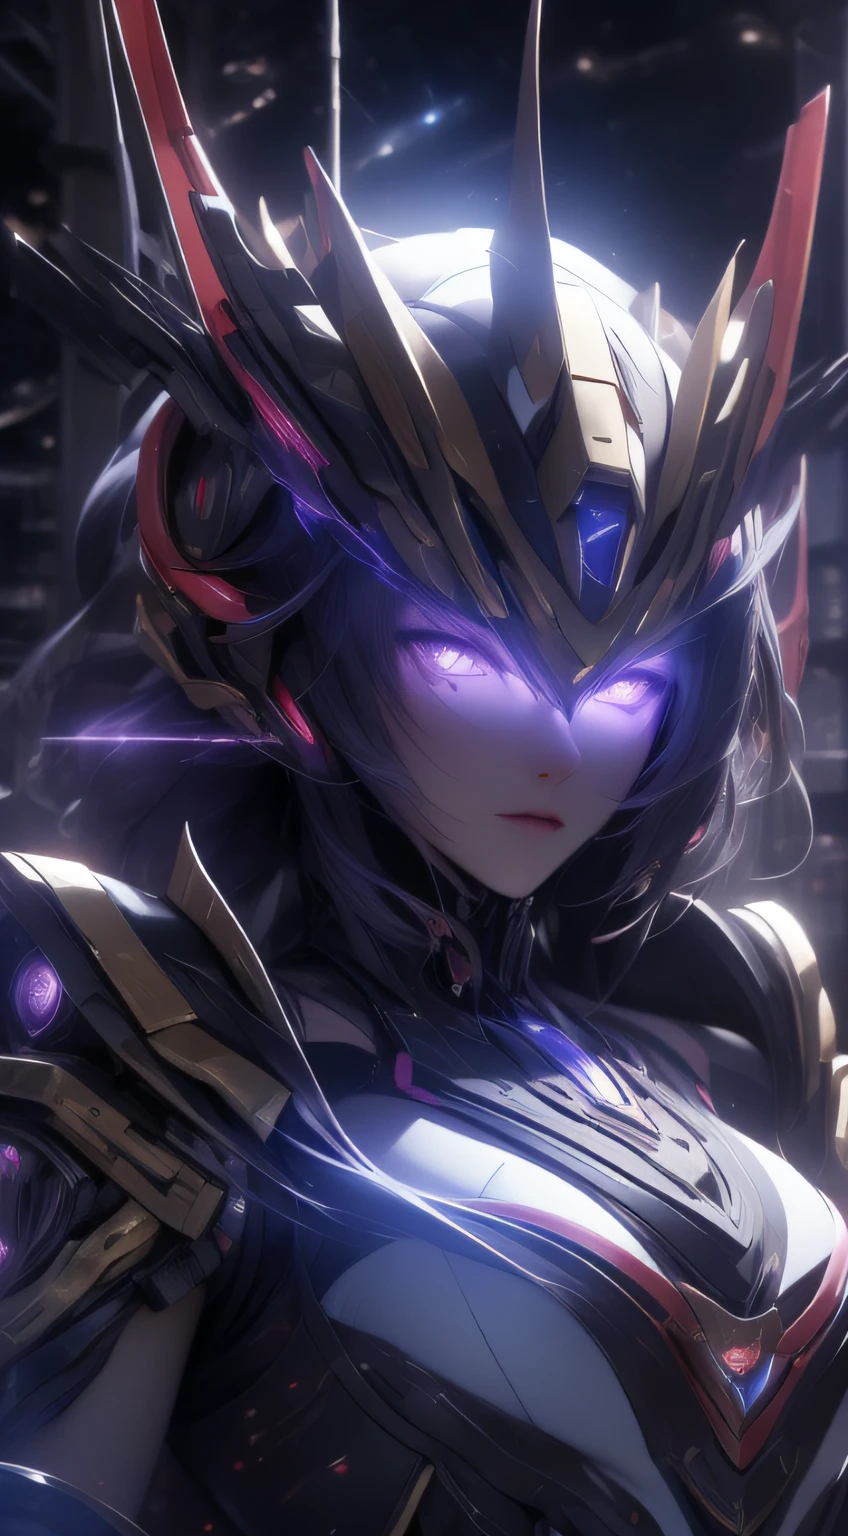 Masterpiece, highest quality, 8k, realistic details, full of sci-fi elements, cyberpunk, 1 woman wearing a Gundam mech, purple glowing eyes, detailed mecha patterns, half-body perspective, in space